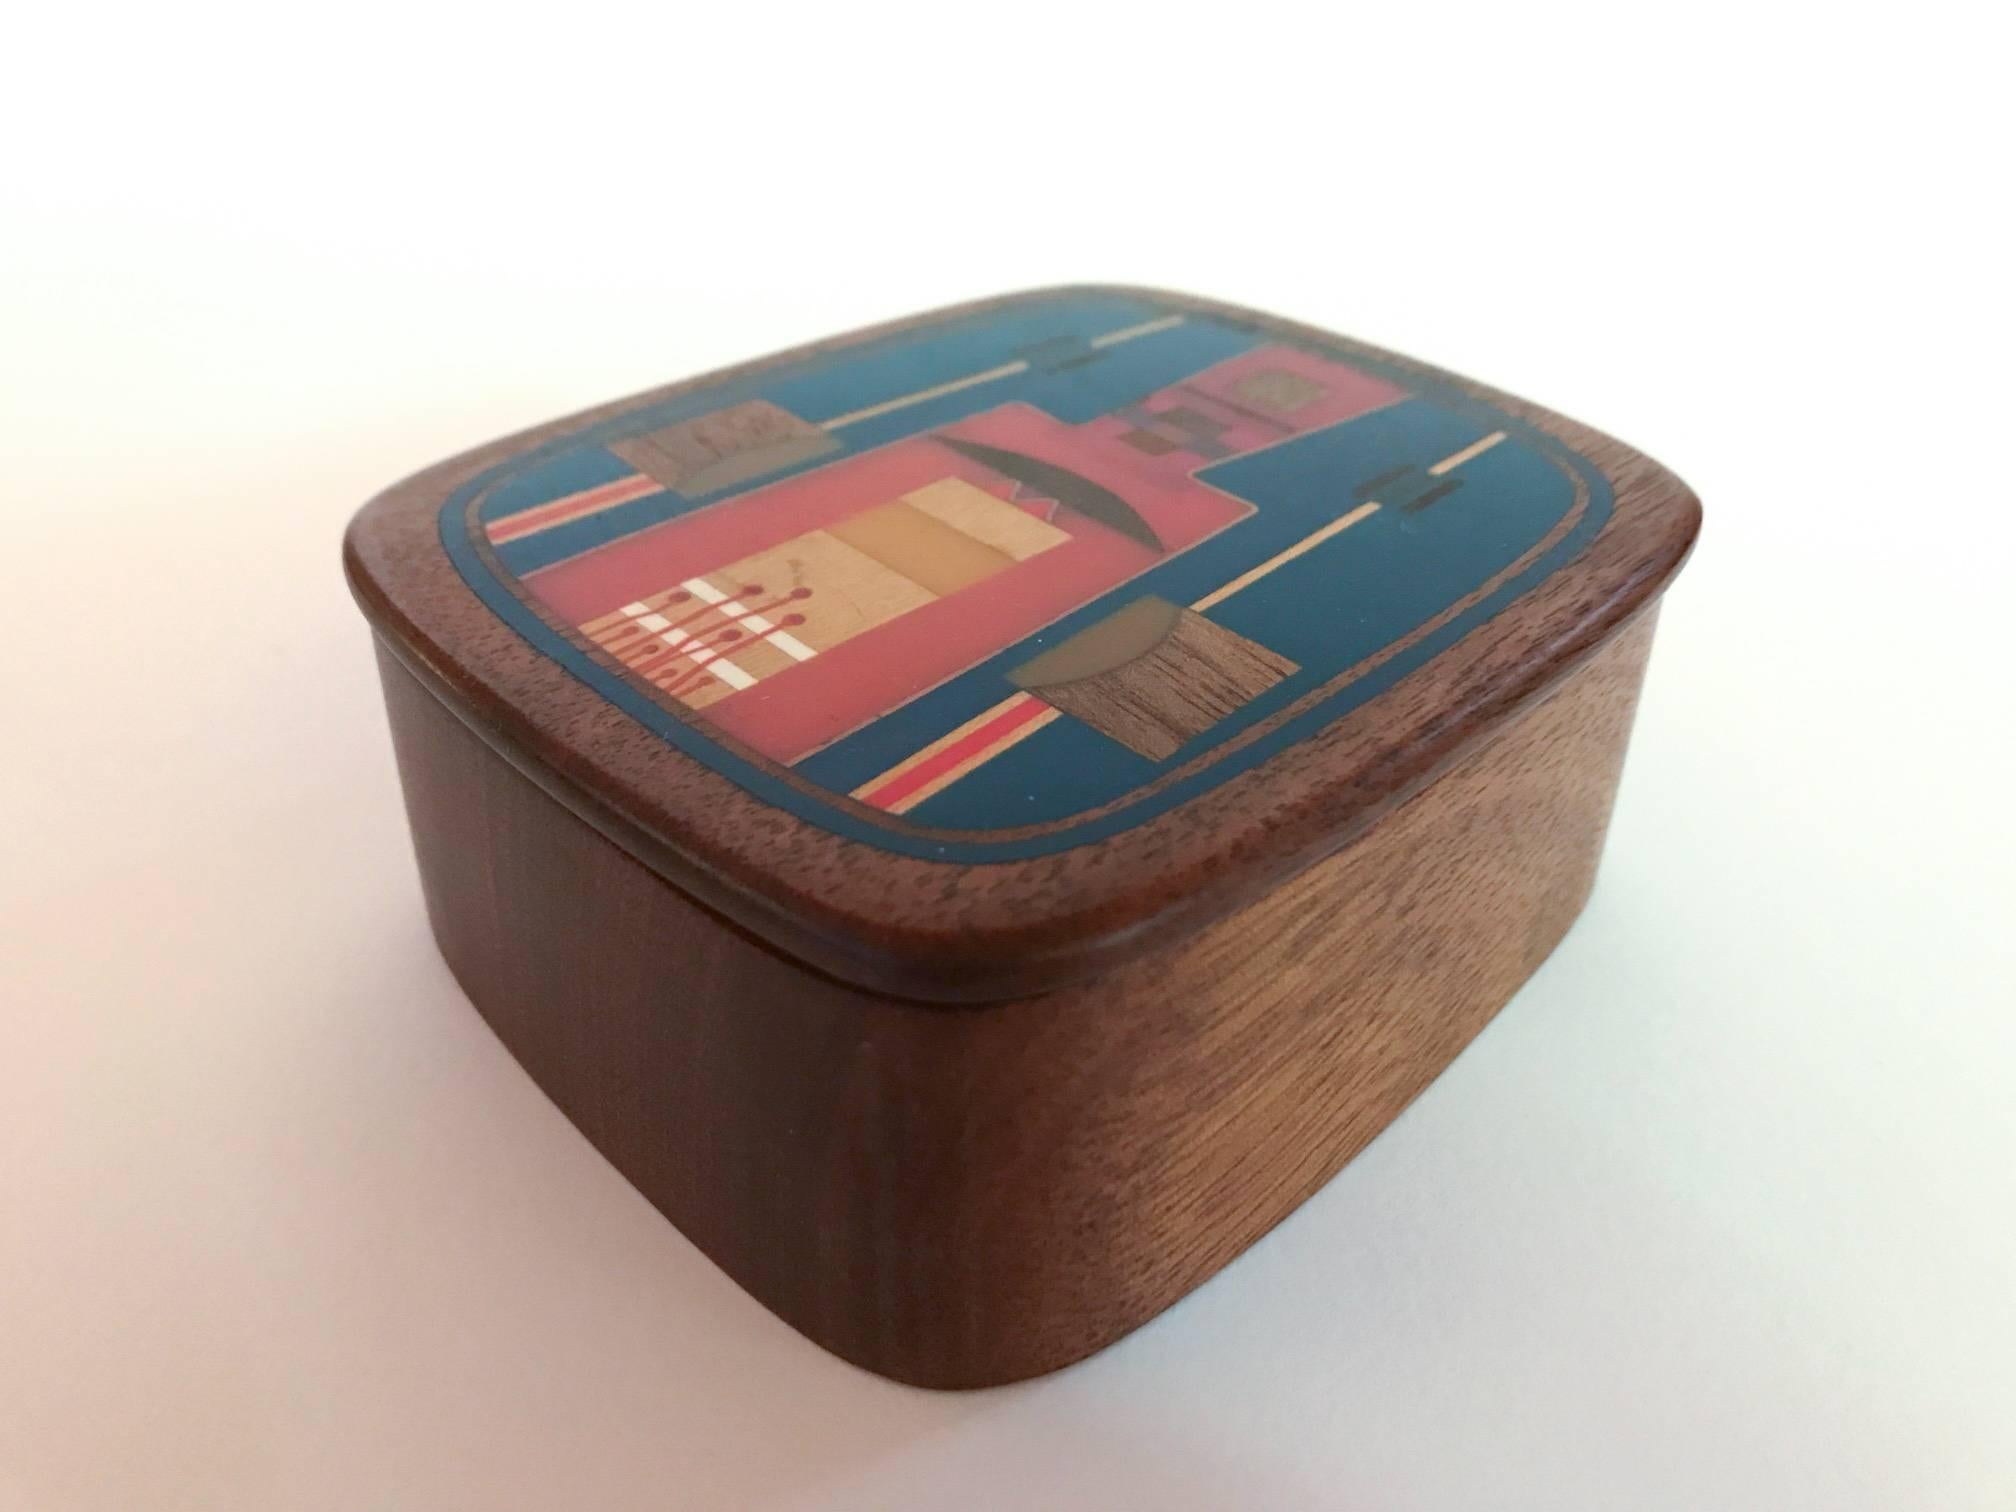 Beautiful wood and resin inlaid box by San Francisco Bay artisan Robert McKeown (1931-1989). Signed by artist.